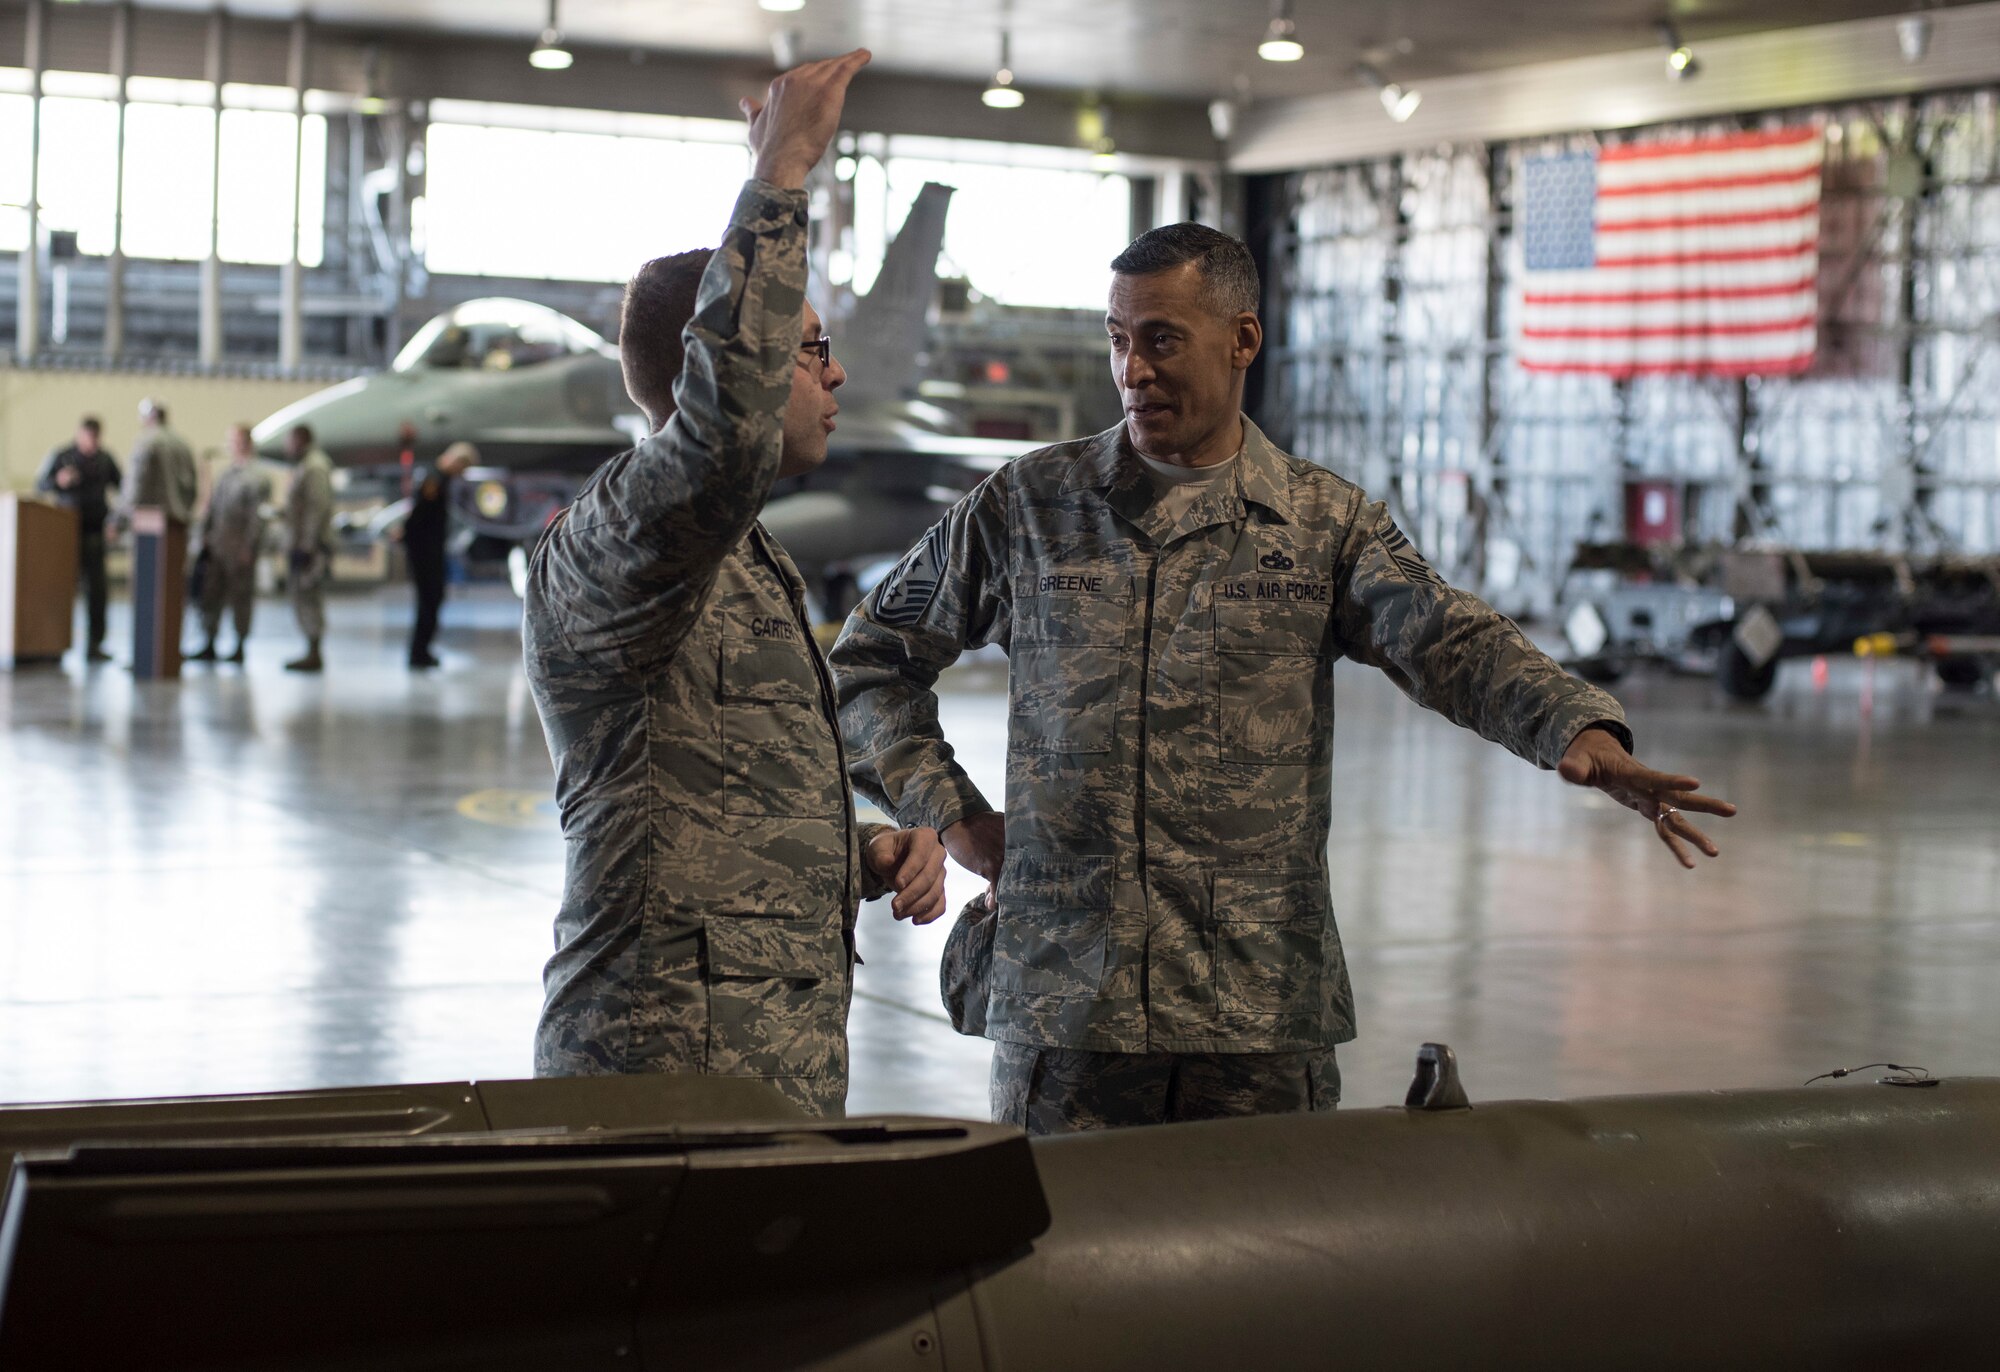 U.S. Air Force Senior Airman Robert Carter, left, a 35th Maintenance Group weapons load crew member, showcases displayed munitions to Chief Master Sgt. Terrence A. Greene, right, the United States Forces Japan and Fifth Air Force command chief, during his tour at Misawa Air Base, Japan, Feb. 23, 2018. Greene stressed the importance of Airmen knowing their mission and how their individual actions contribute to stability across the region. (U.S. Air Force photo by Airman 1st Class Collette Brooks)